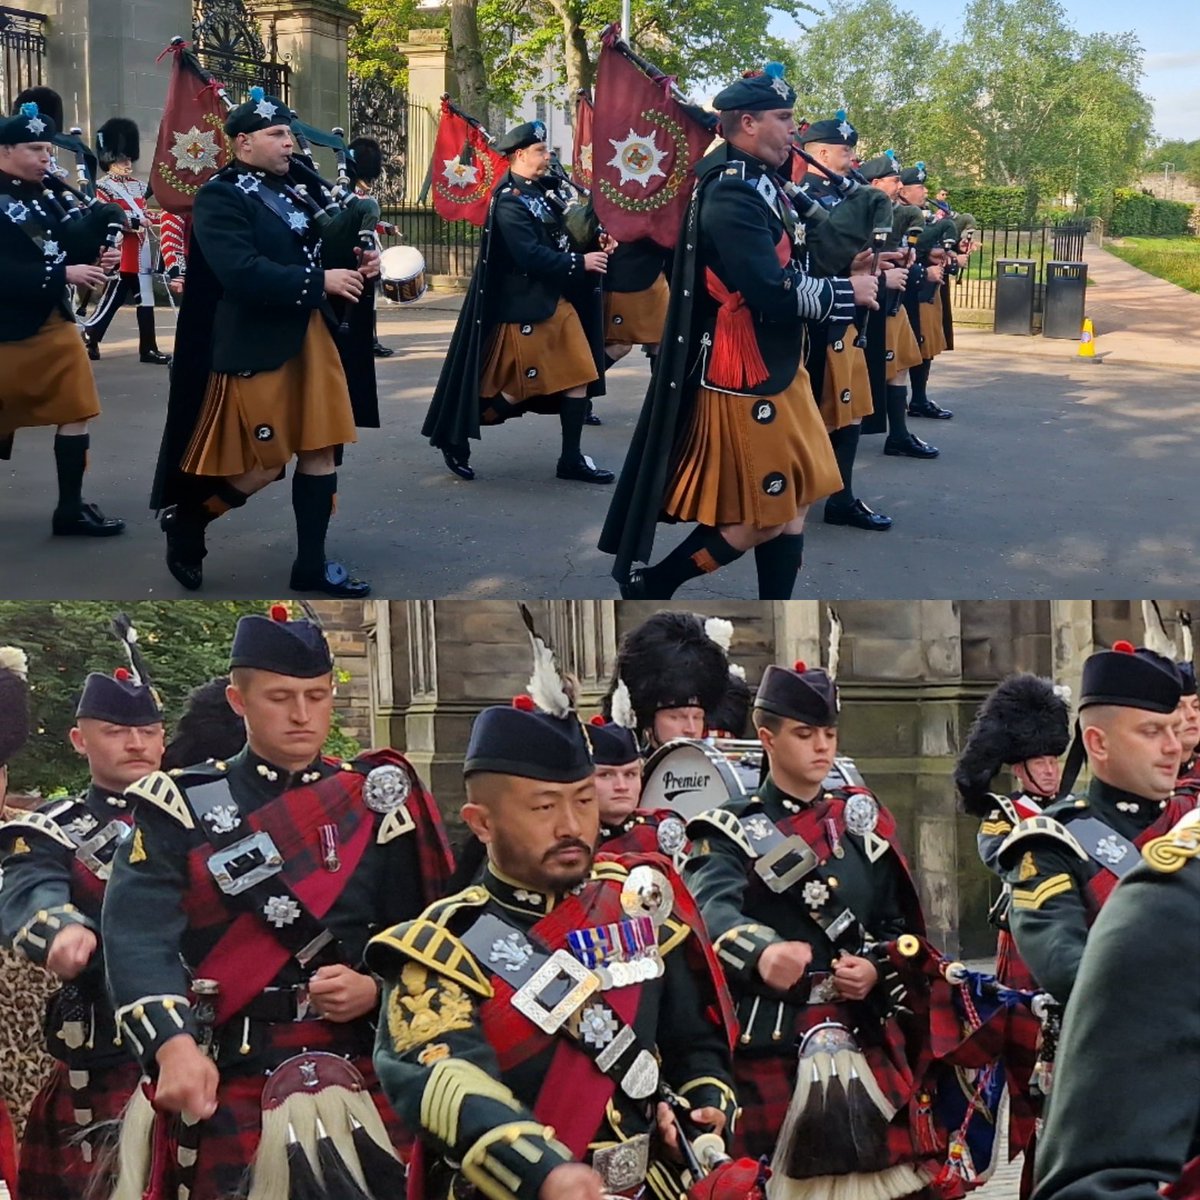 Final preparations have started for the @EdinburghTattoo, performances starting next week. Looking forward to seeing some familiar faces performing P&D of @irish_guards, 2nd and 4th Battalion @The_SCOTS. Question is will I get a chance for an @innisandgunn over the next month?